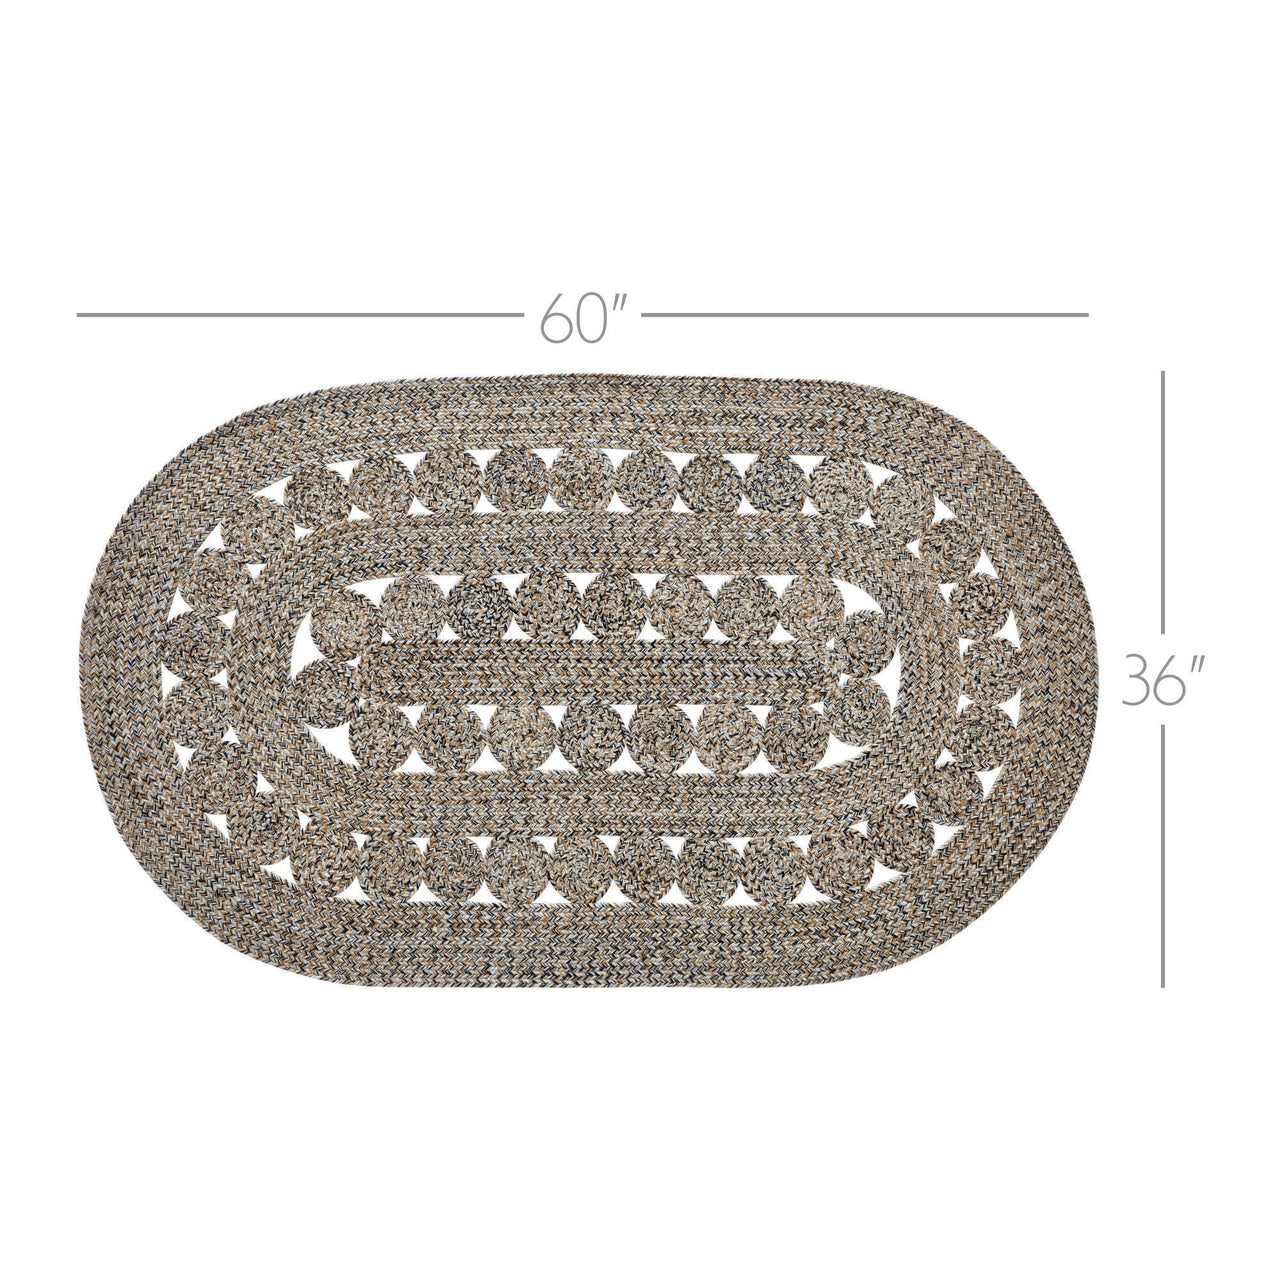 https://www.thefoxdecor.com/cdn/shop/products/Celeste_20Blended_20Pebble_20Indoor-Outdoor_20Rug_20Oval_2036x60_20Infographic_201_1280x.jpg?v=1679033633